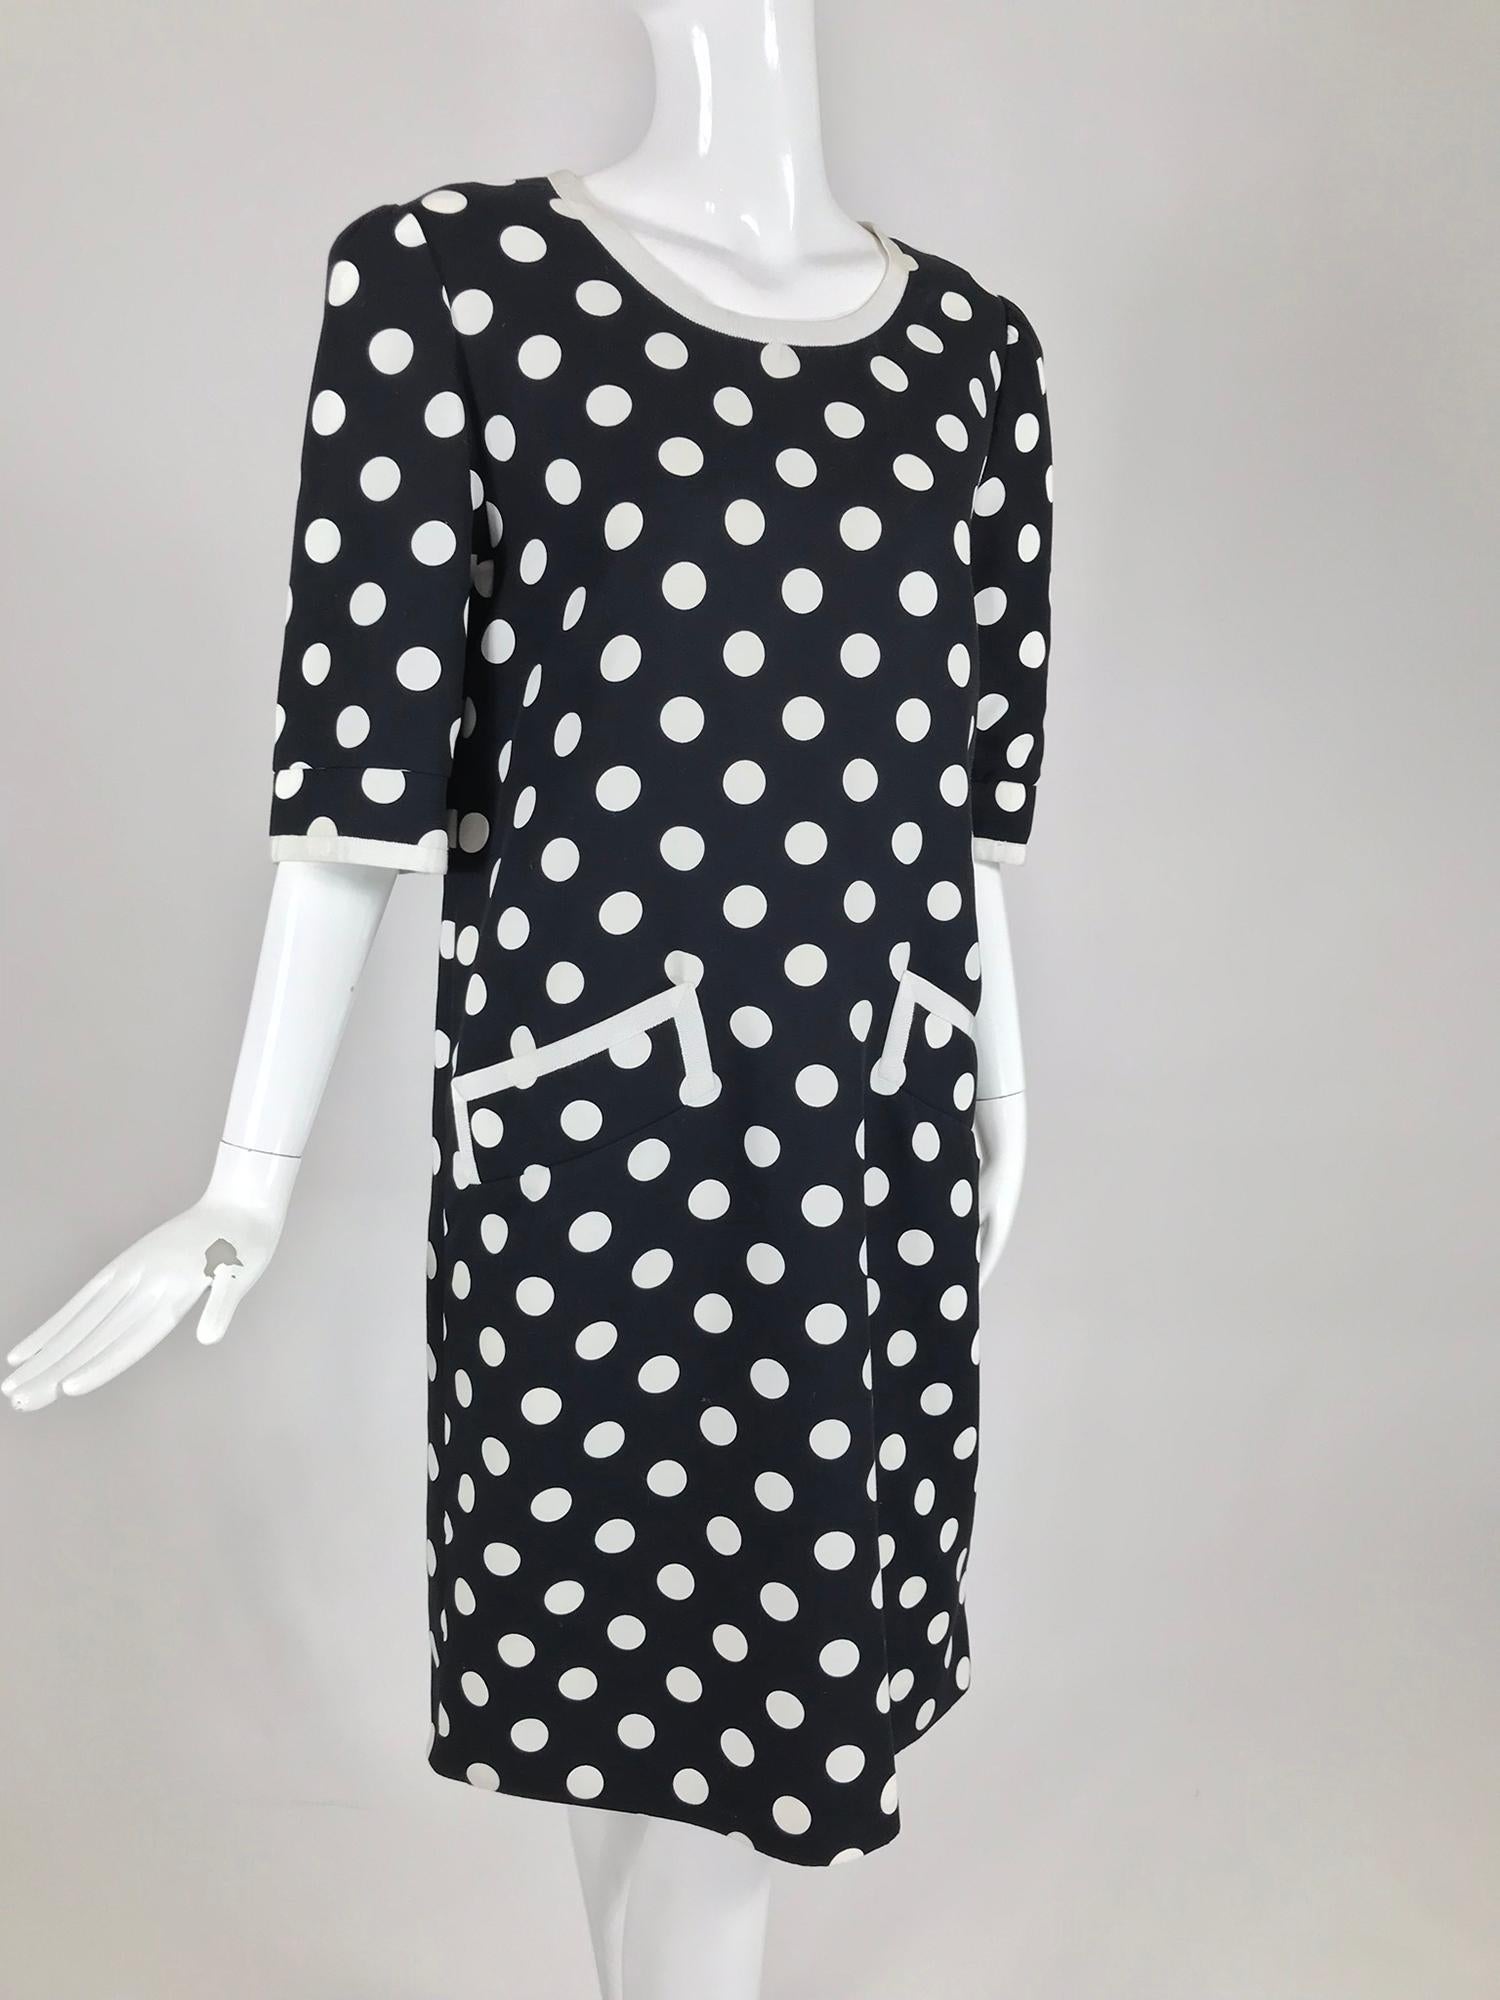 Givenchy Couture black and white cotton polka dot day dress from the late 1980s-early 1990s. I love polka dots, they just make me feel happy, this dress is so classic I don't think it will ever go out of style. Add a wide belt in a bright colour